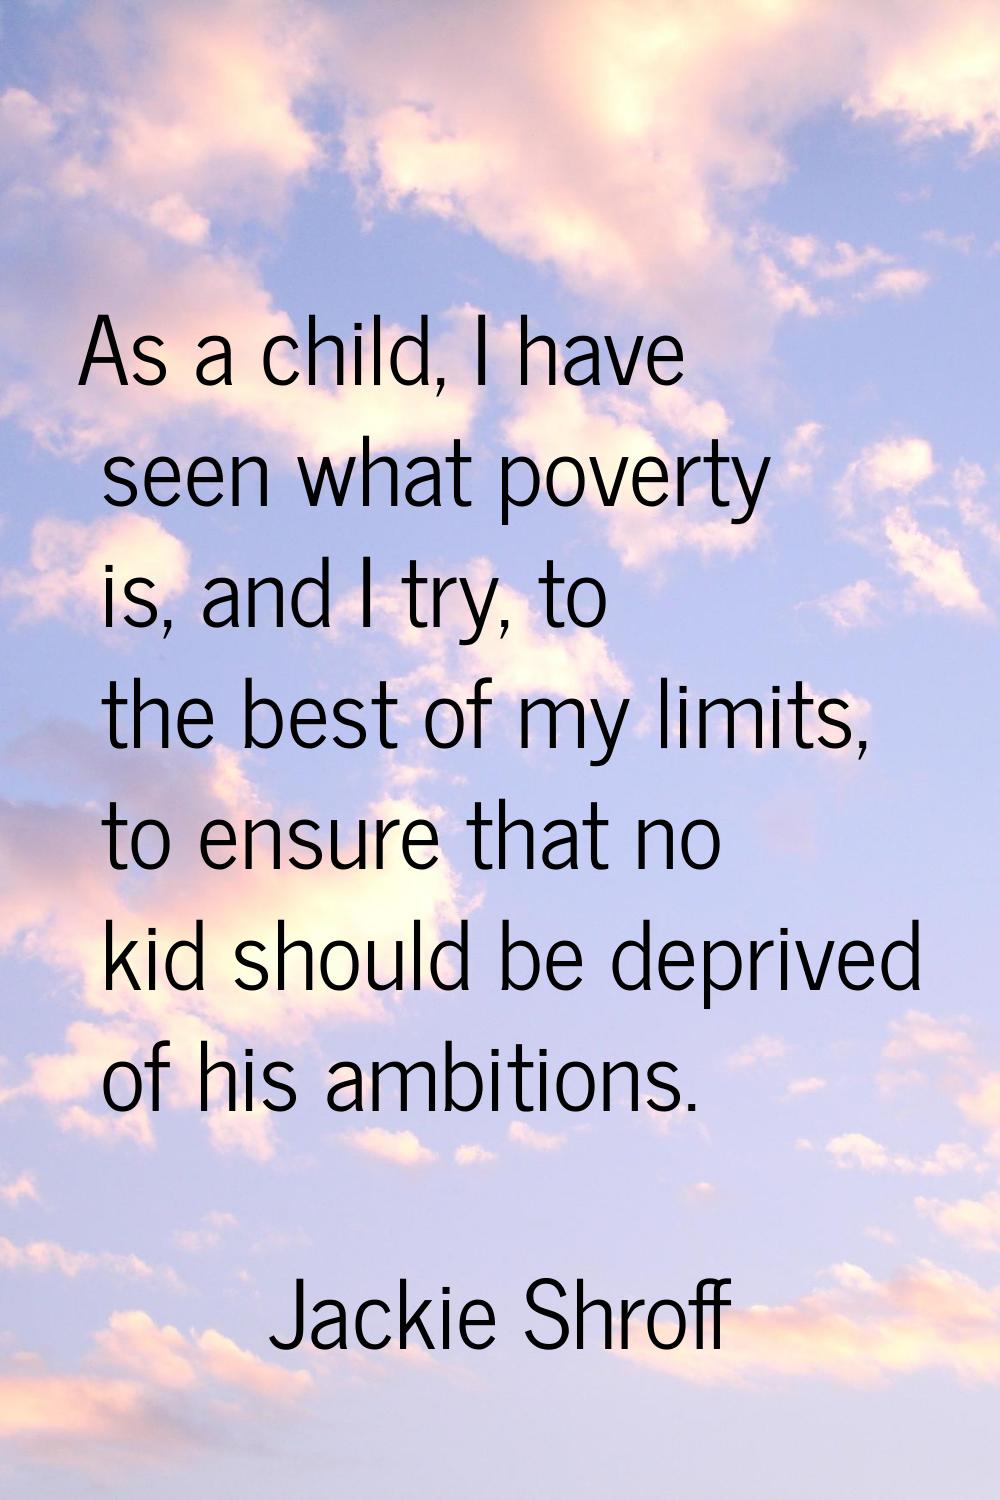 As a child, I have seen what poverty is, and I try, to the best of my limits, to ensure that no kid